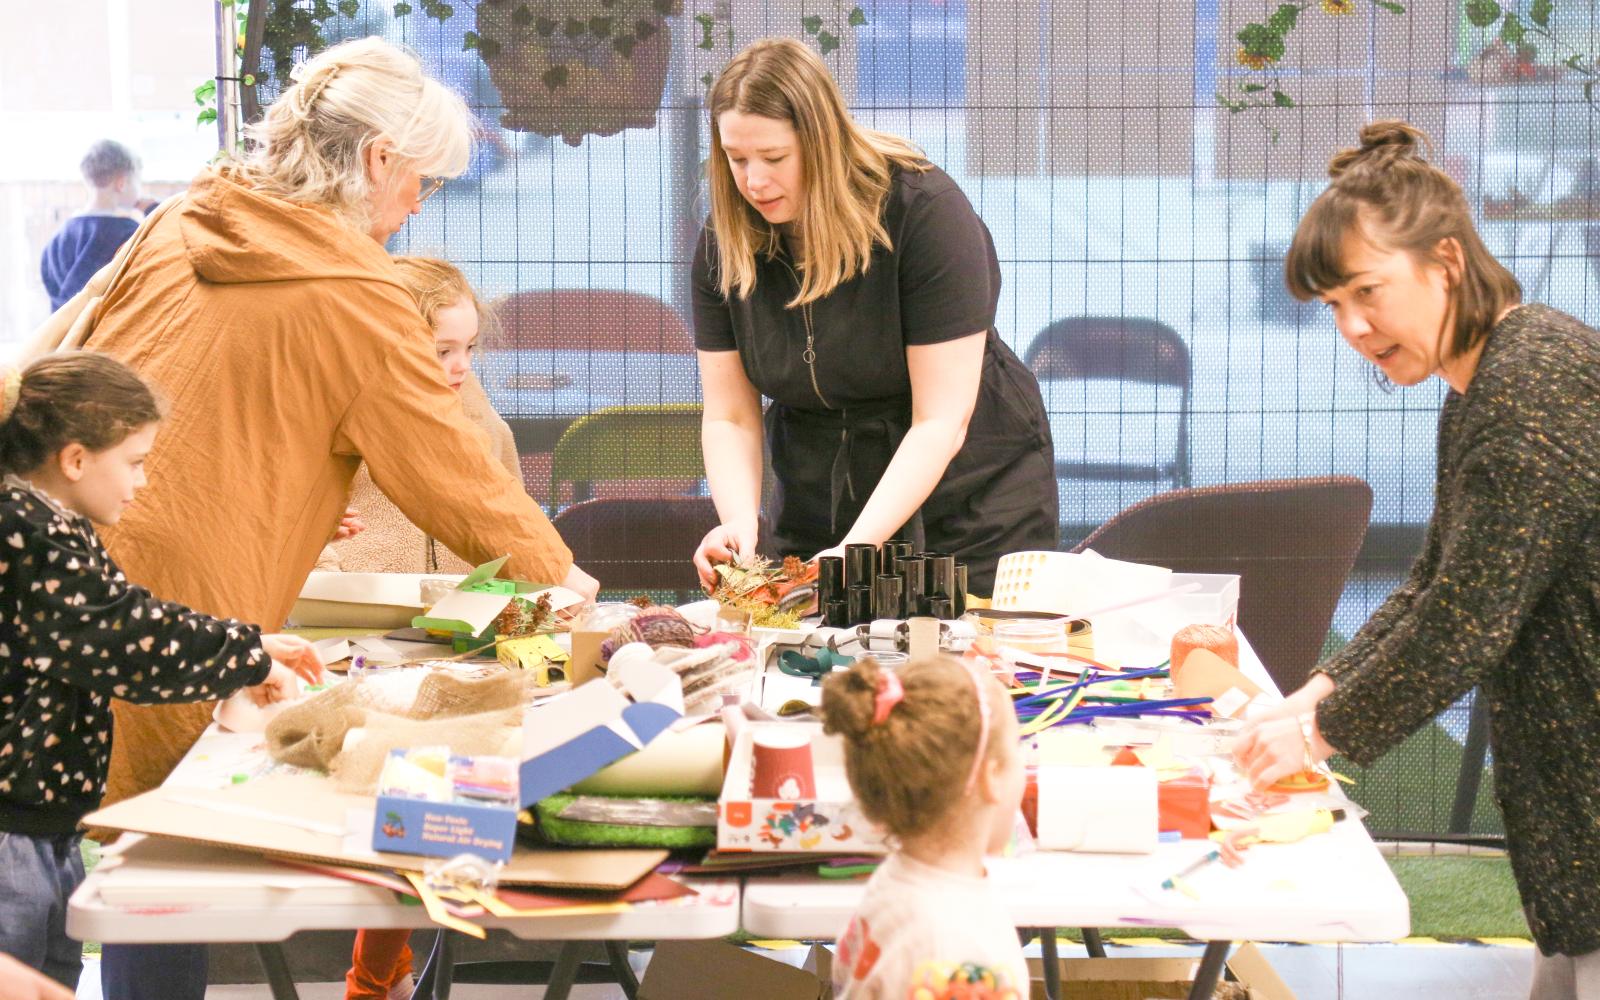 A group of women and children are working around a large craft table